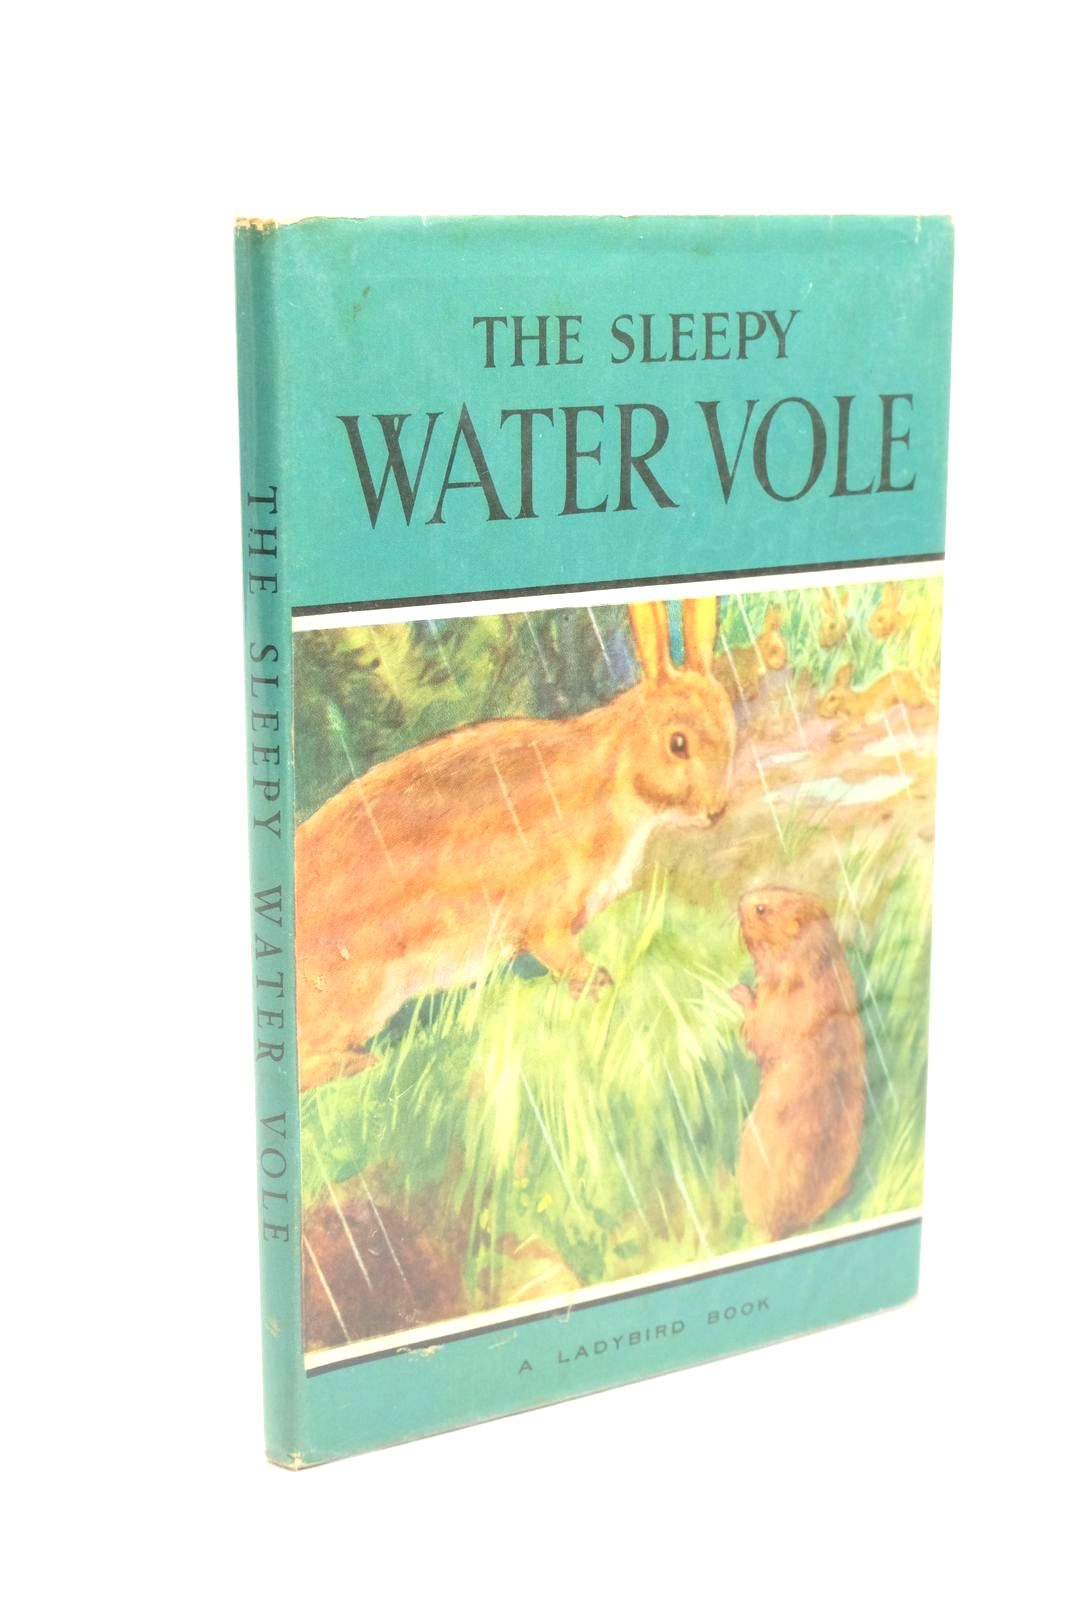 Photo of THE SLEEPY WATER VOLE written by Barr, Noel illustrated by Hickling, P.B. published by Wills & Hepworth Ltd. (STOCK CODE: 1322397)  for sale by Stella & Rose's Books